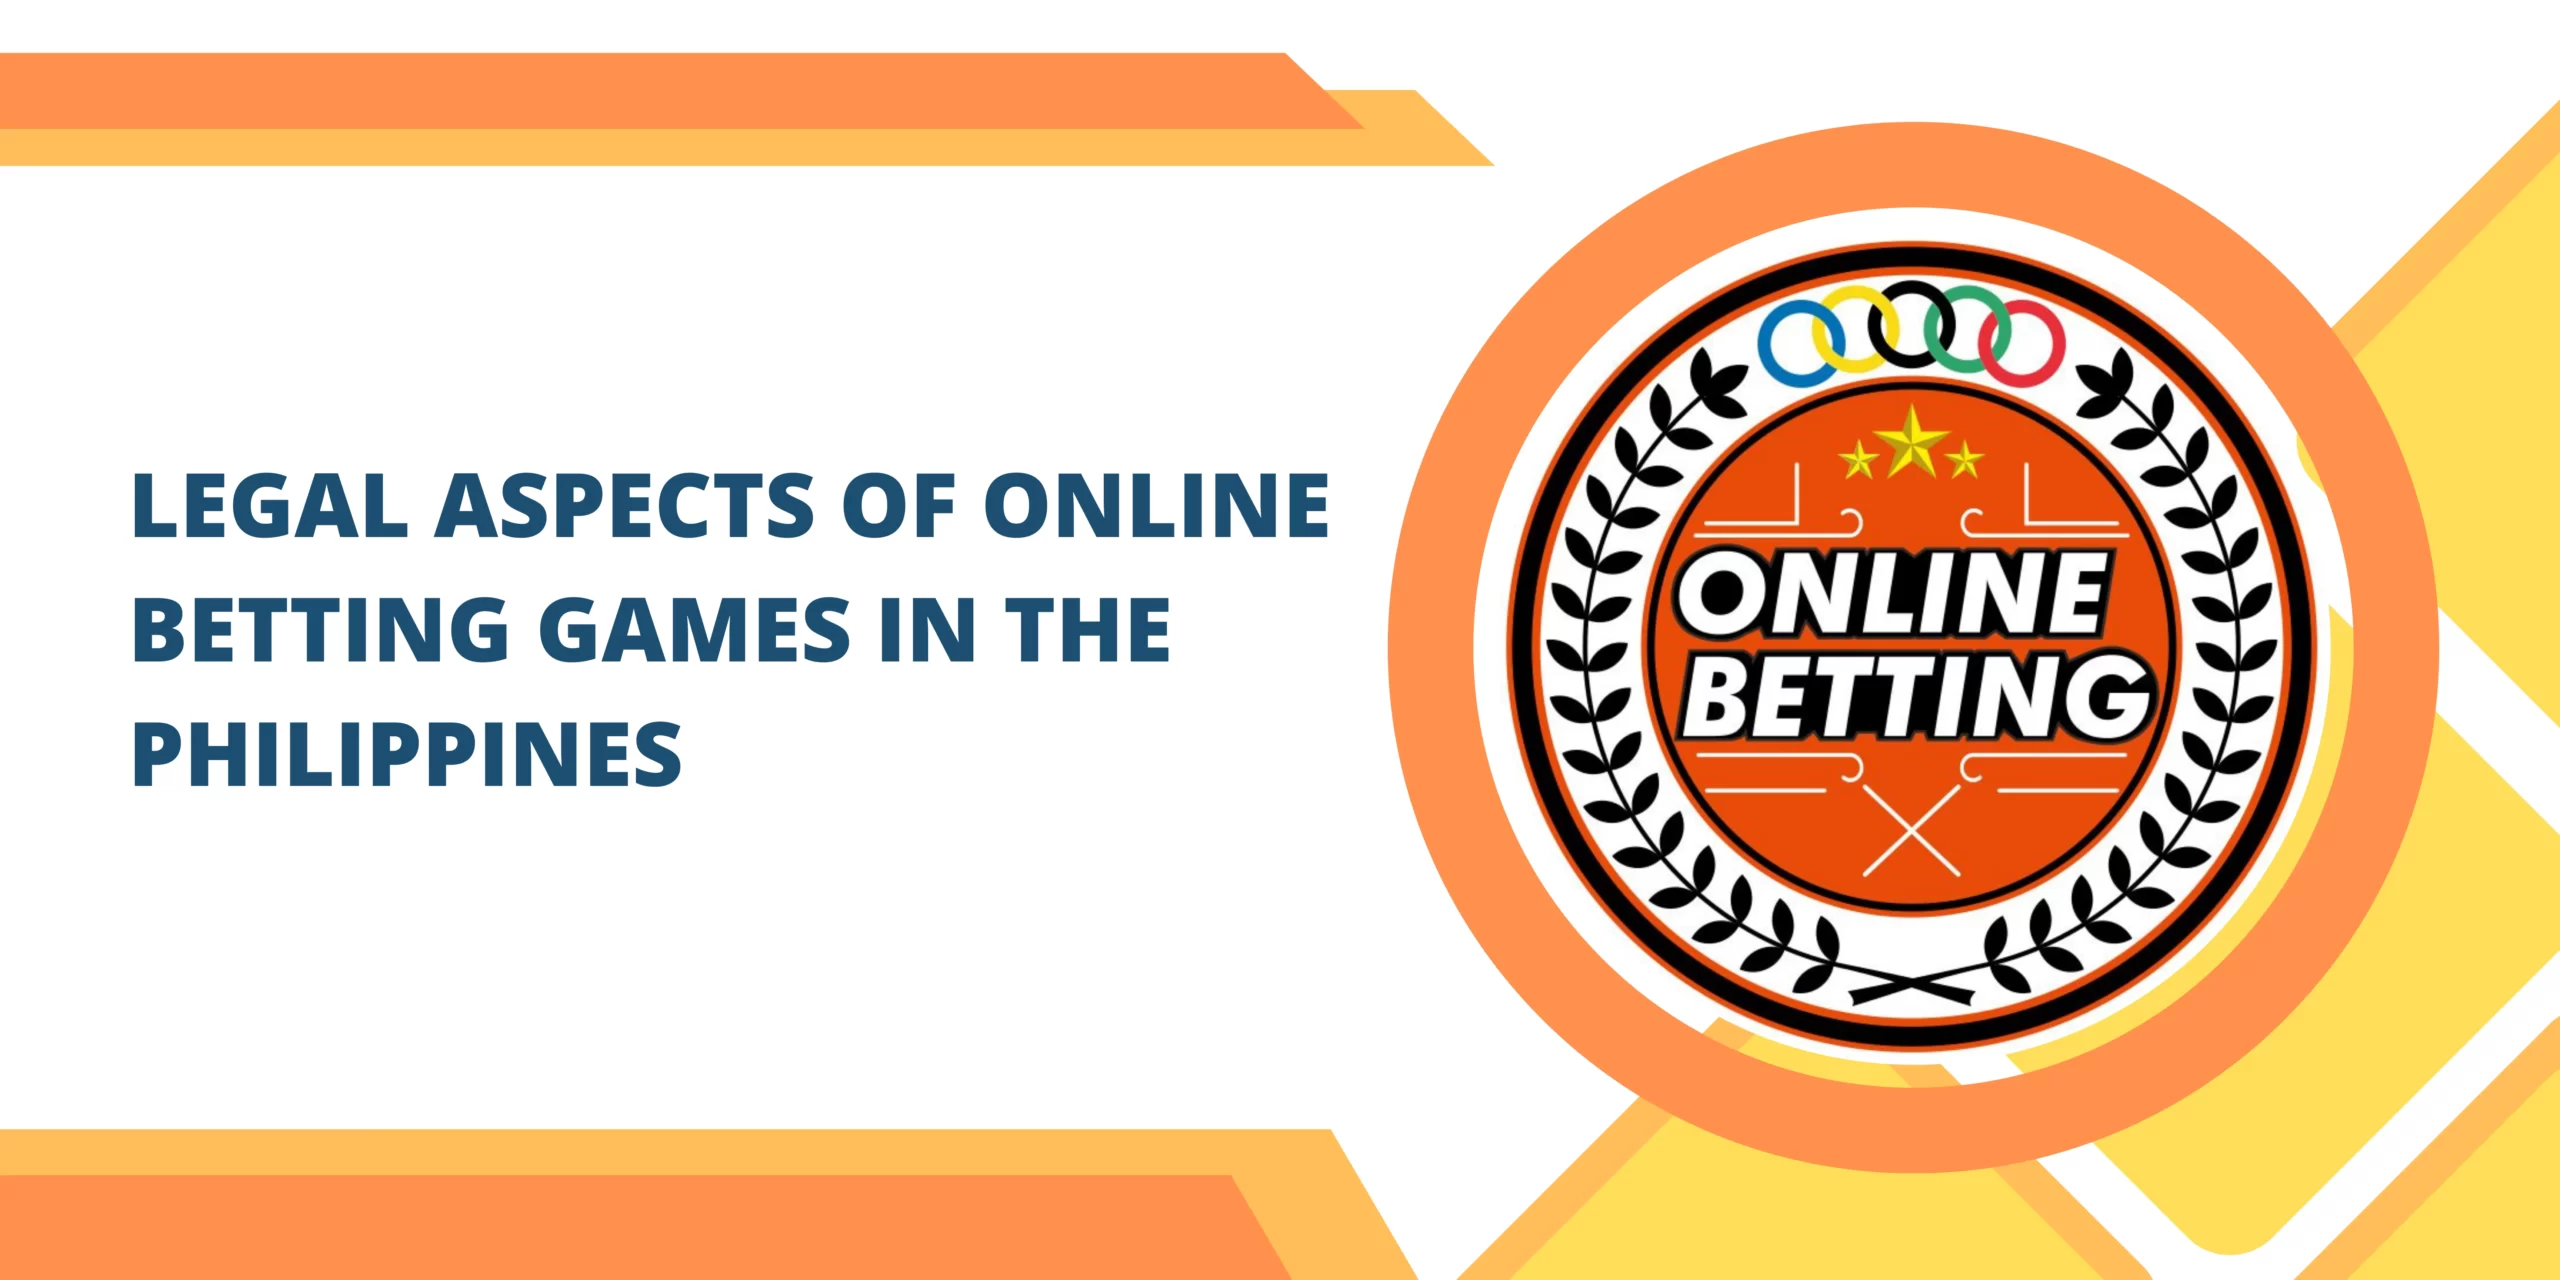 Legal Aspects of Online Betting Games in the Philippines